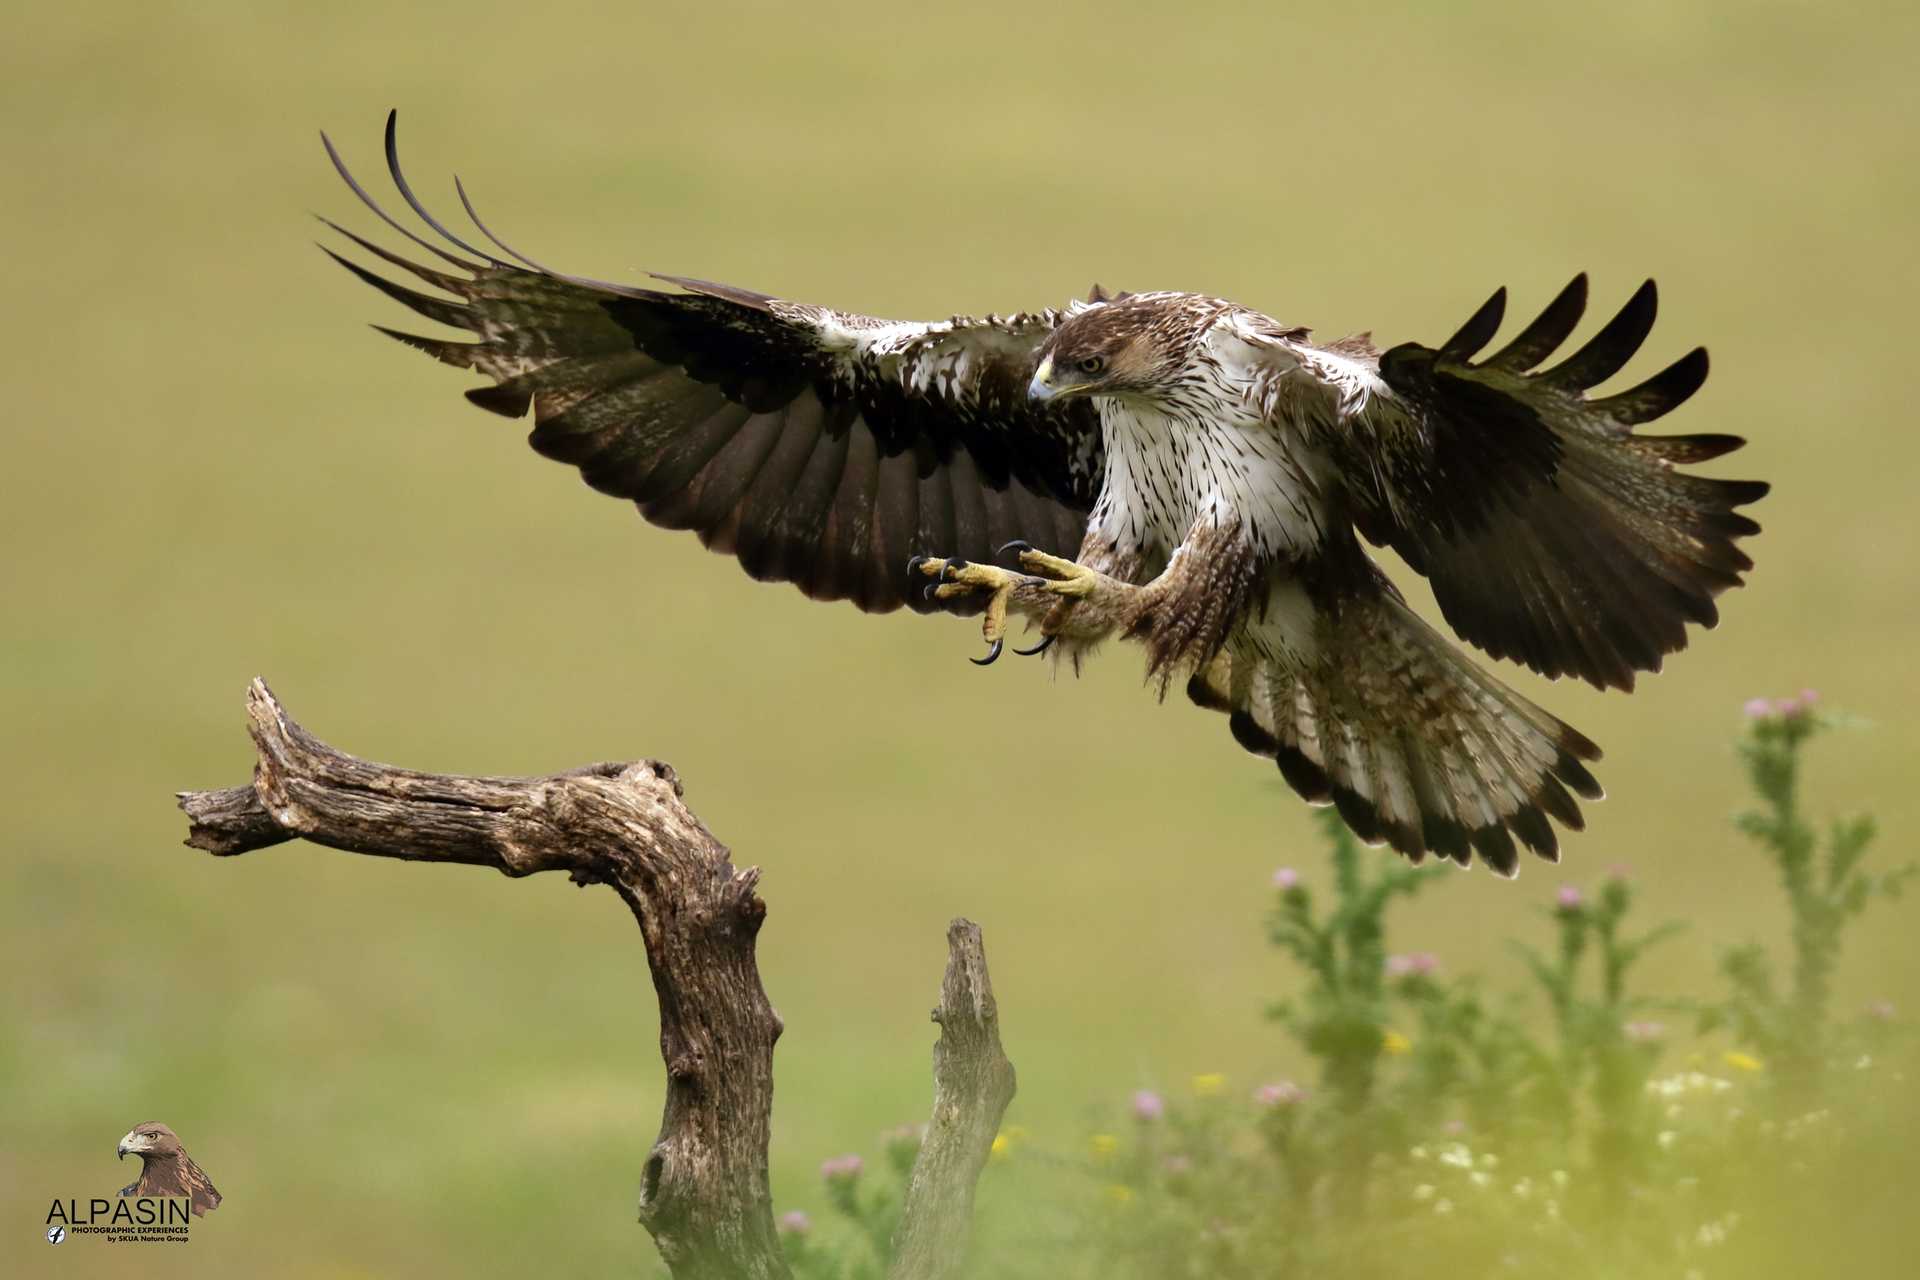 Photo experience with large Iberian birds of prey